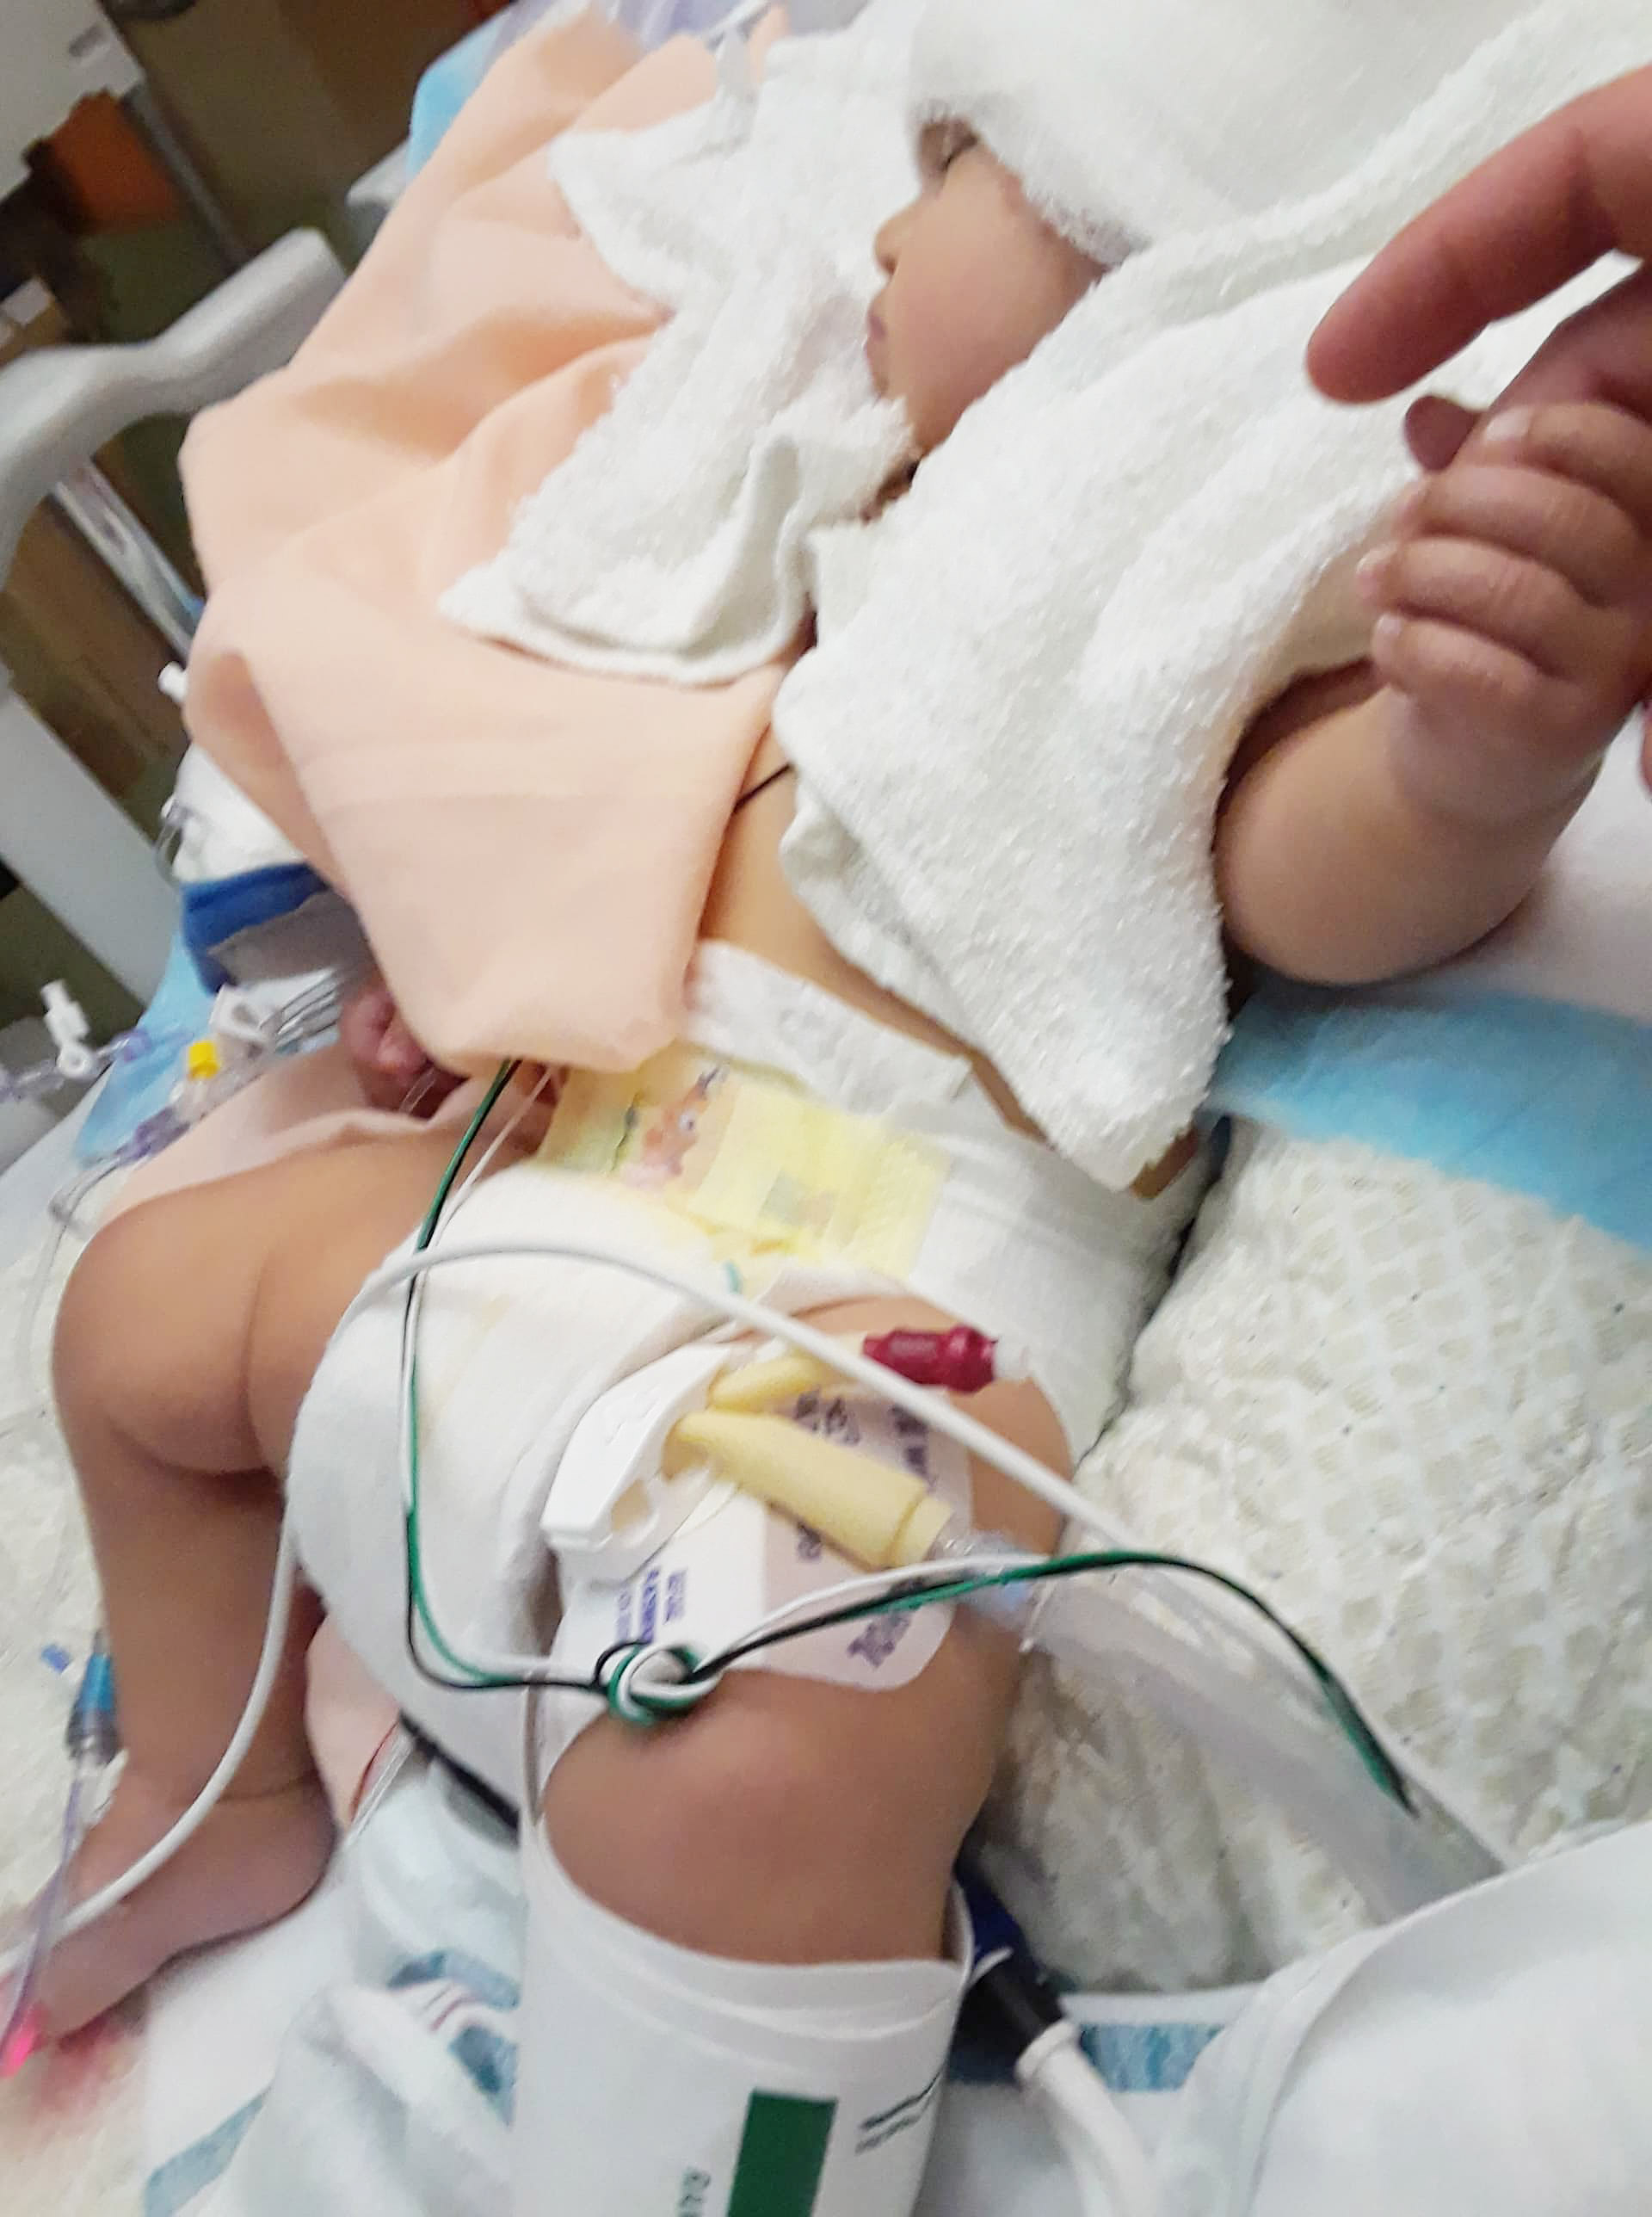 PHOTO: Noah Valdez is pictured in the hospital in Edinburg, Texas, where he had surgery for craniosynostosis.